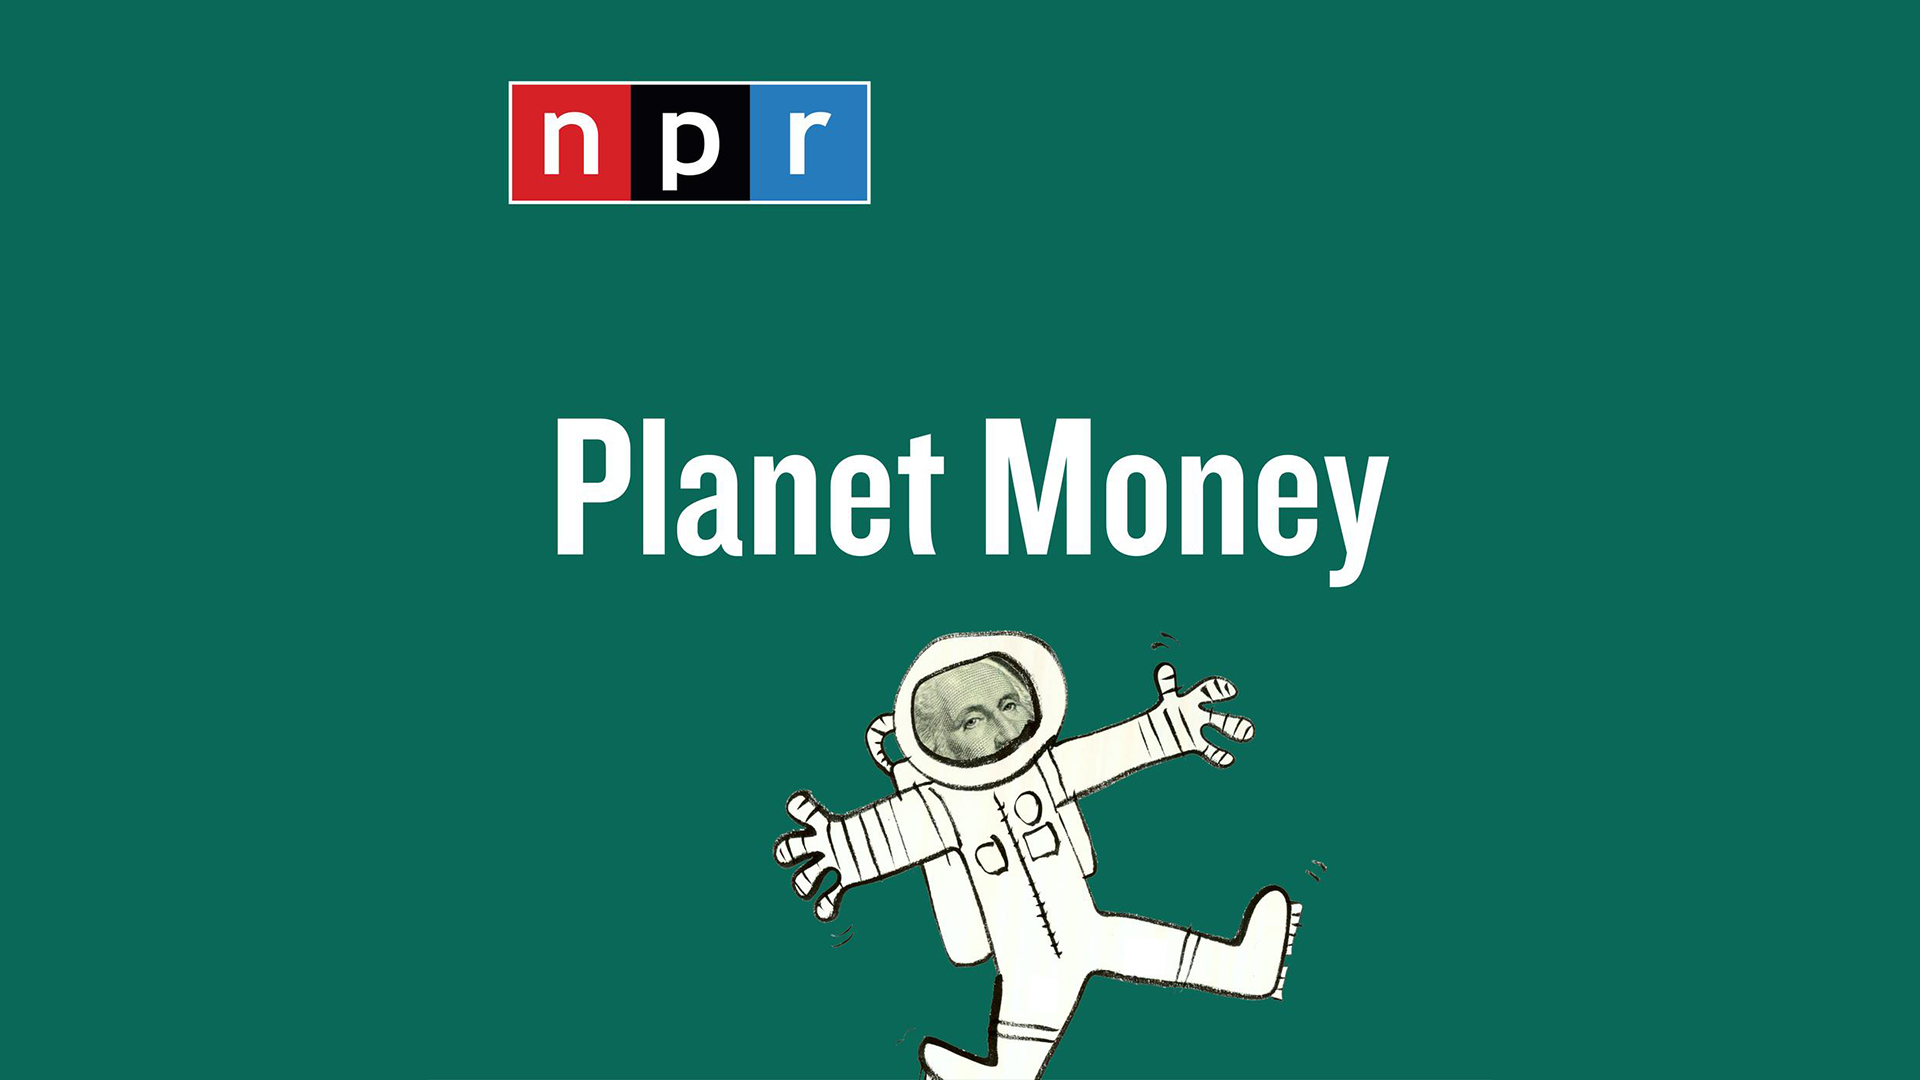 Planet Money from NPR logo featuring George Washington's face from a 1 dollar bill as an astronaut